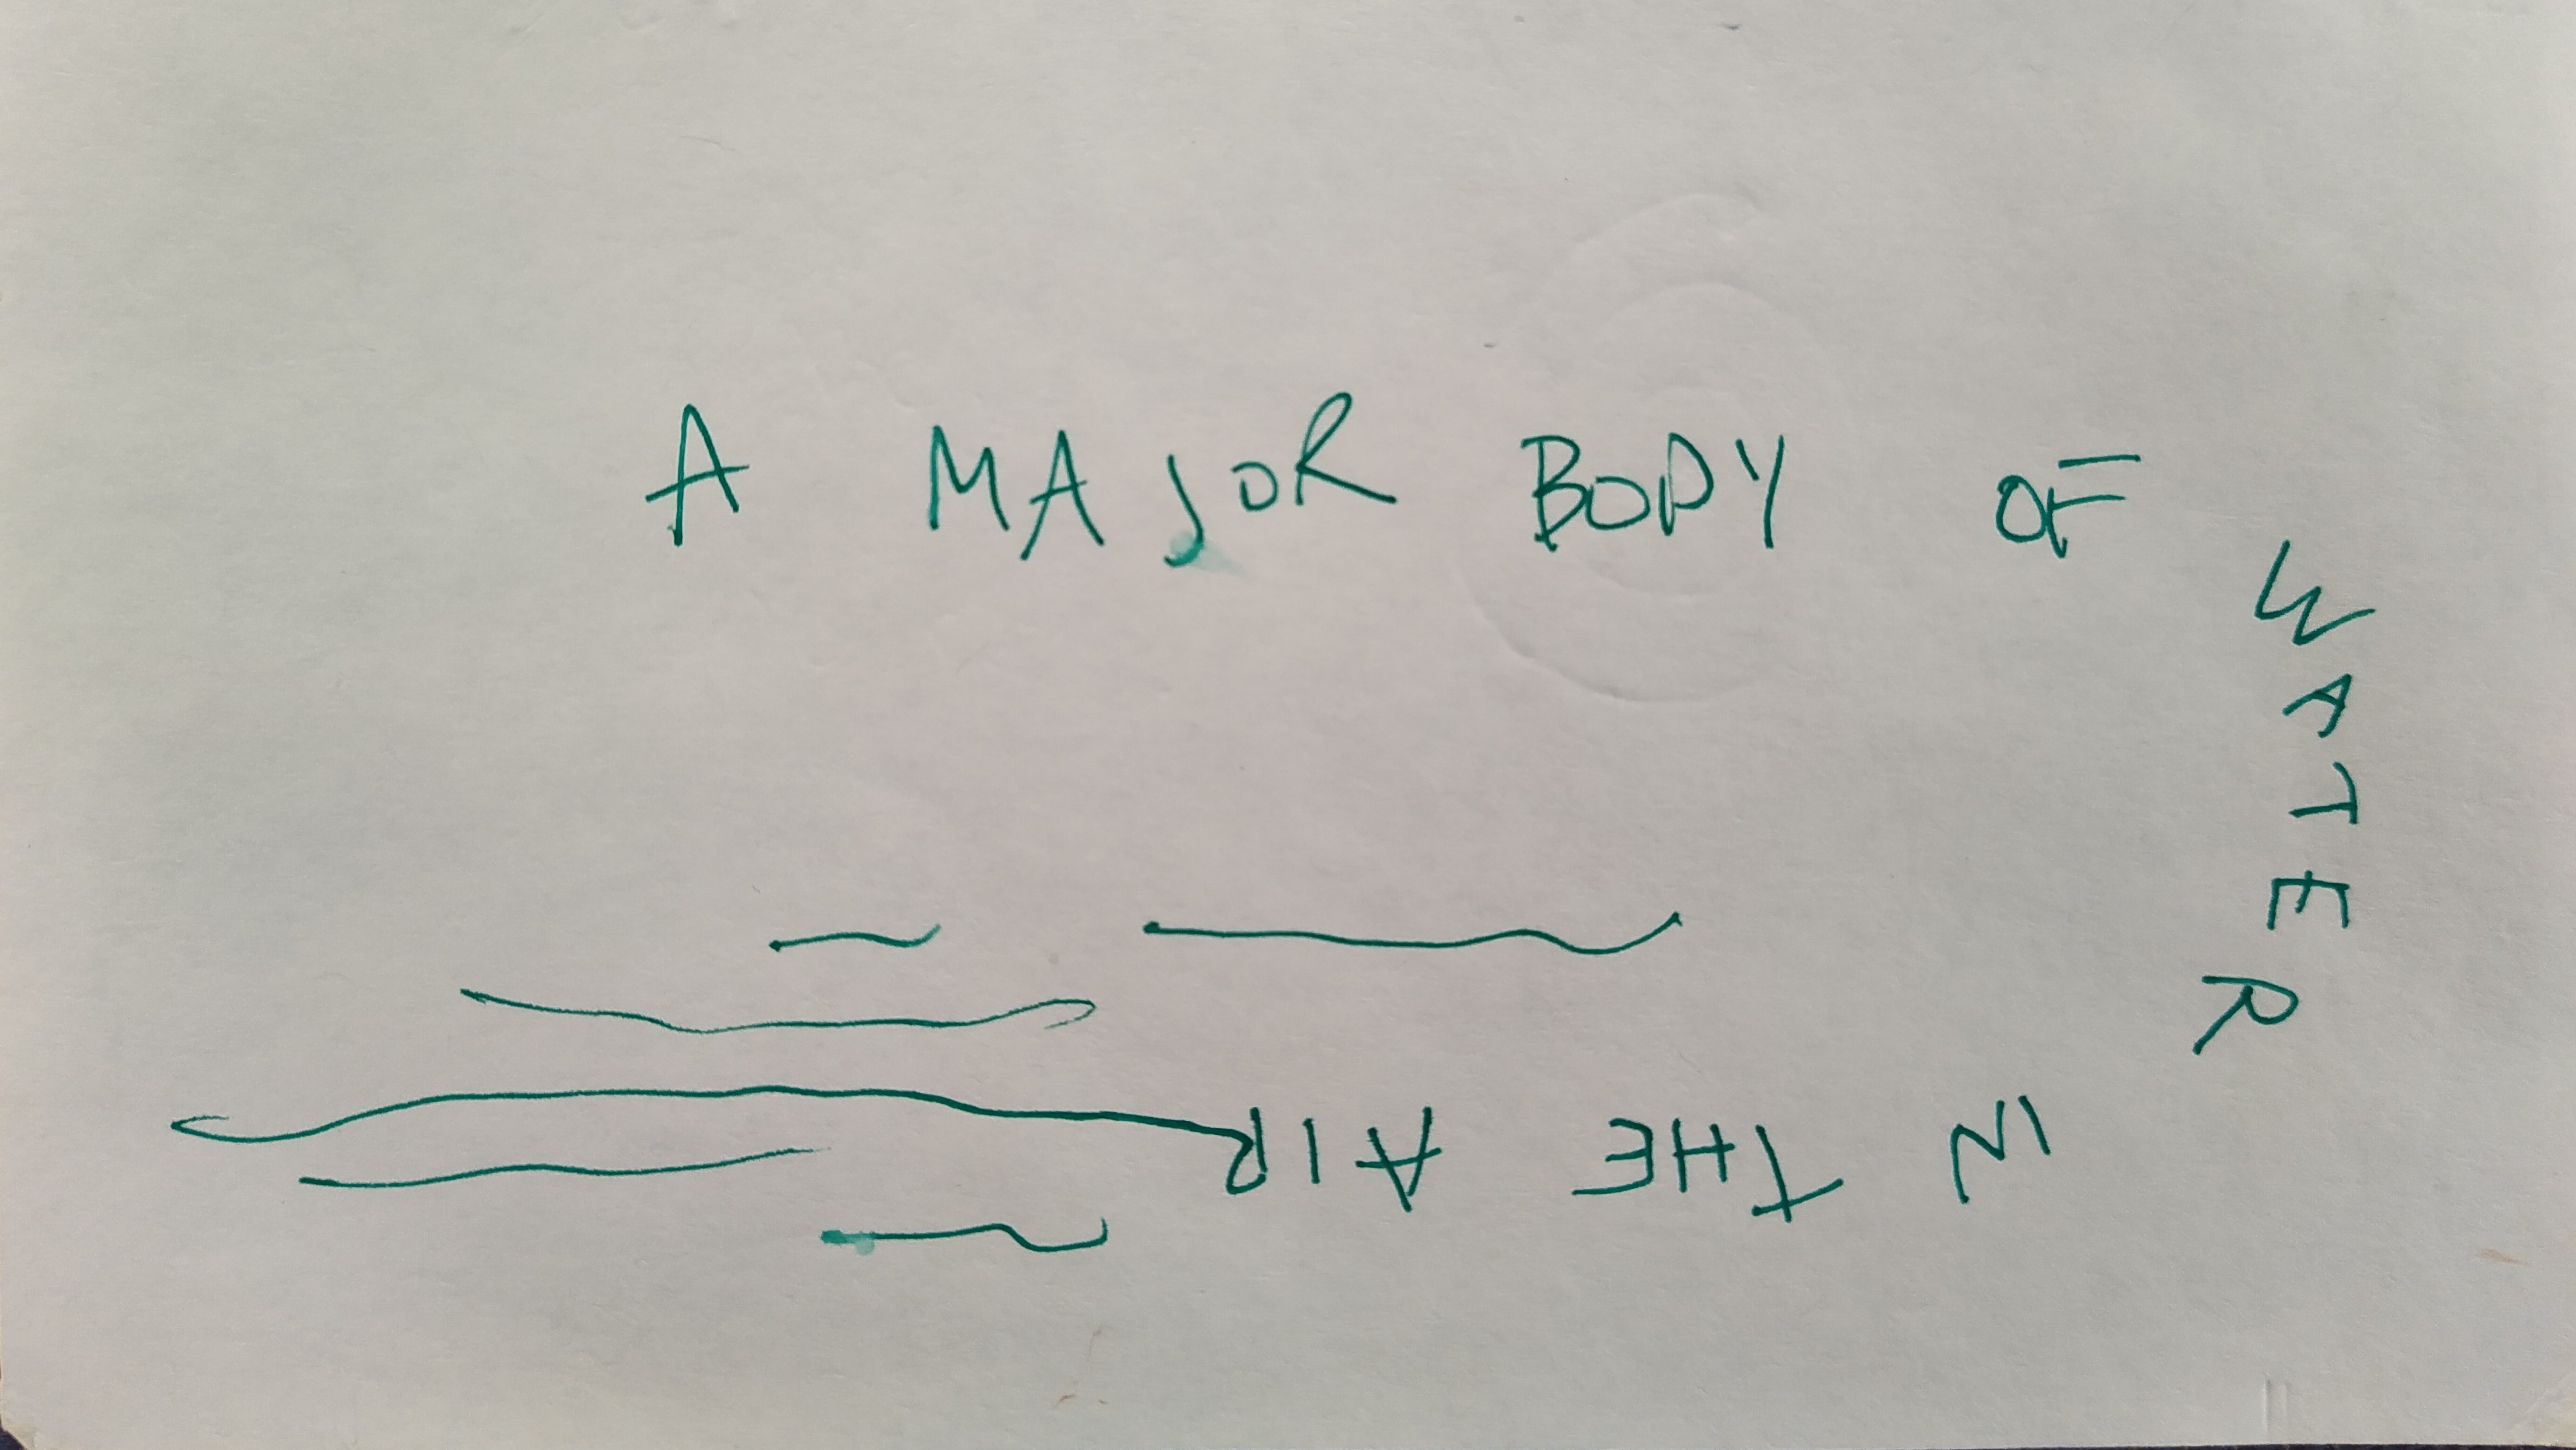 An index card on which the wirds "a major body of water in the air" are written in a curved fashion and truning in to horizontal squiggily lines intended to depict water and or air.